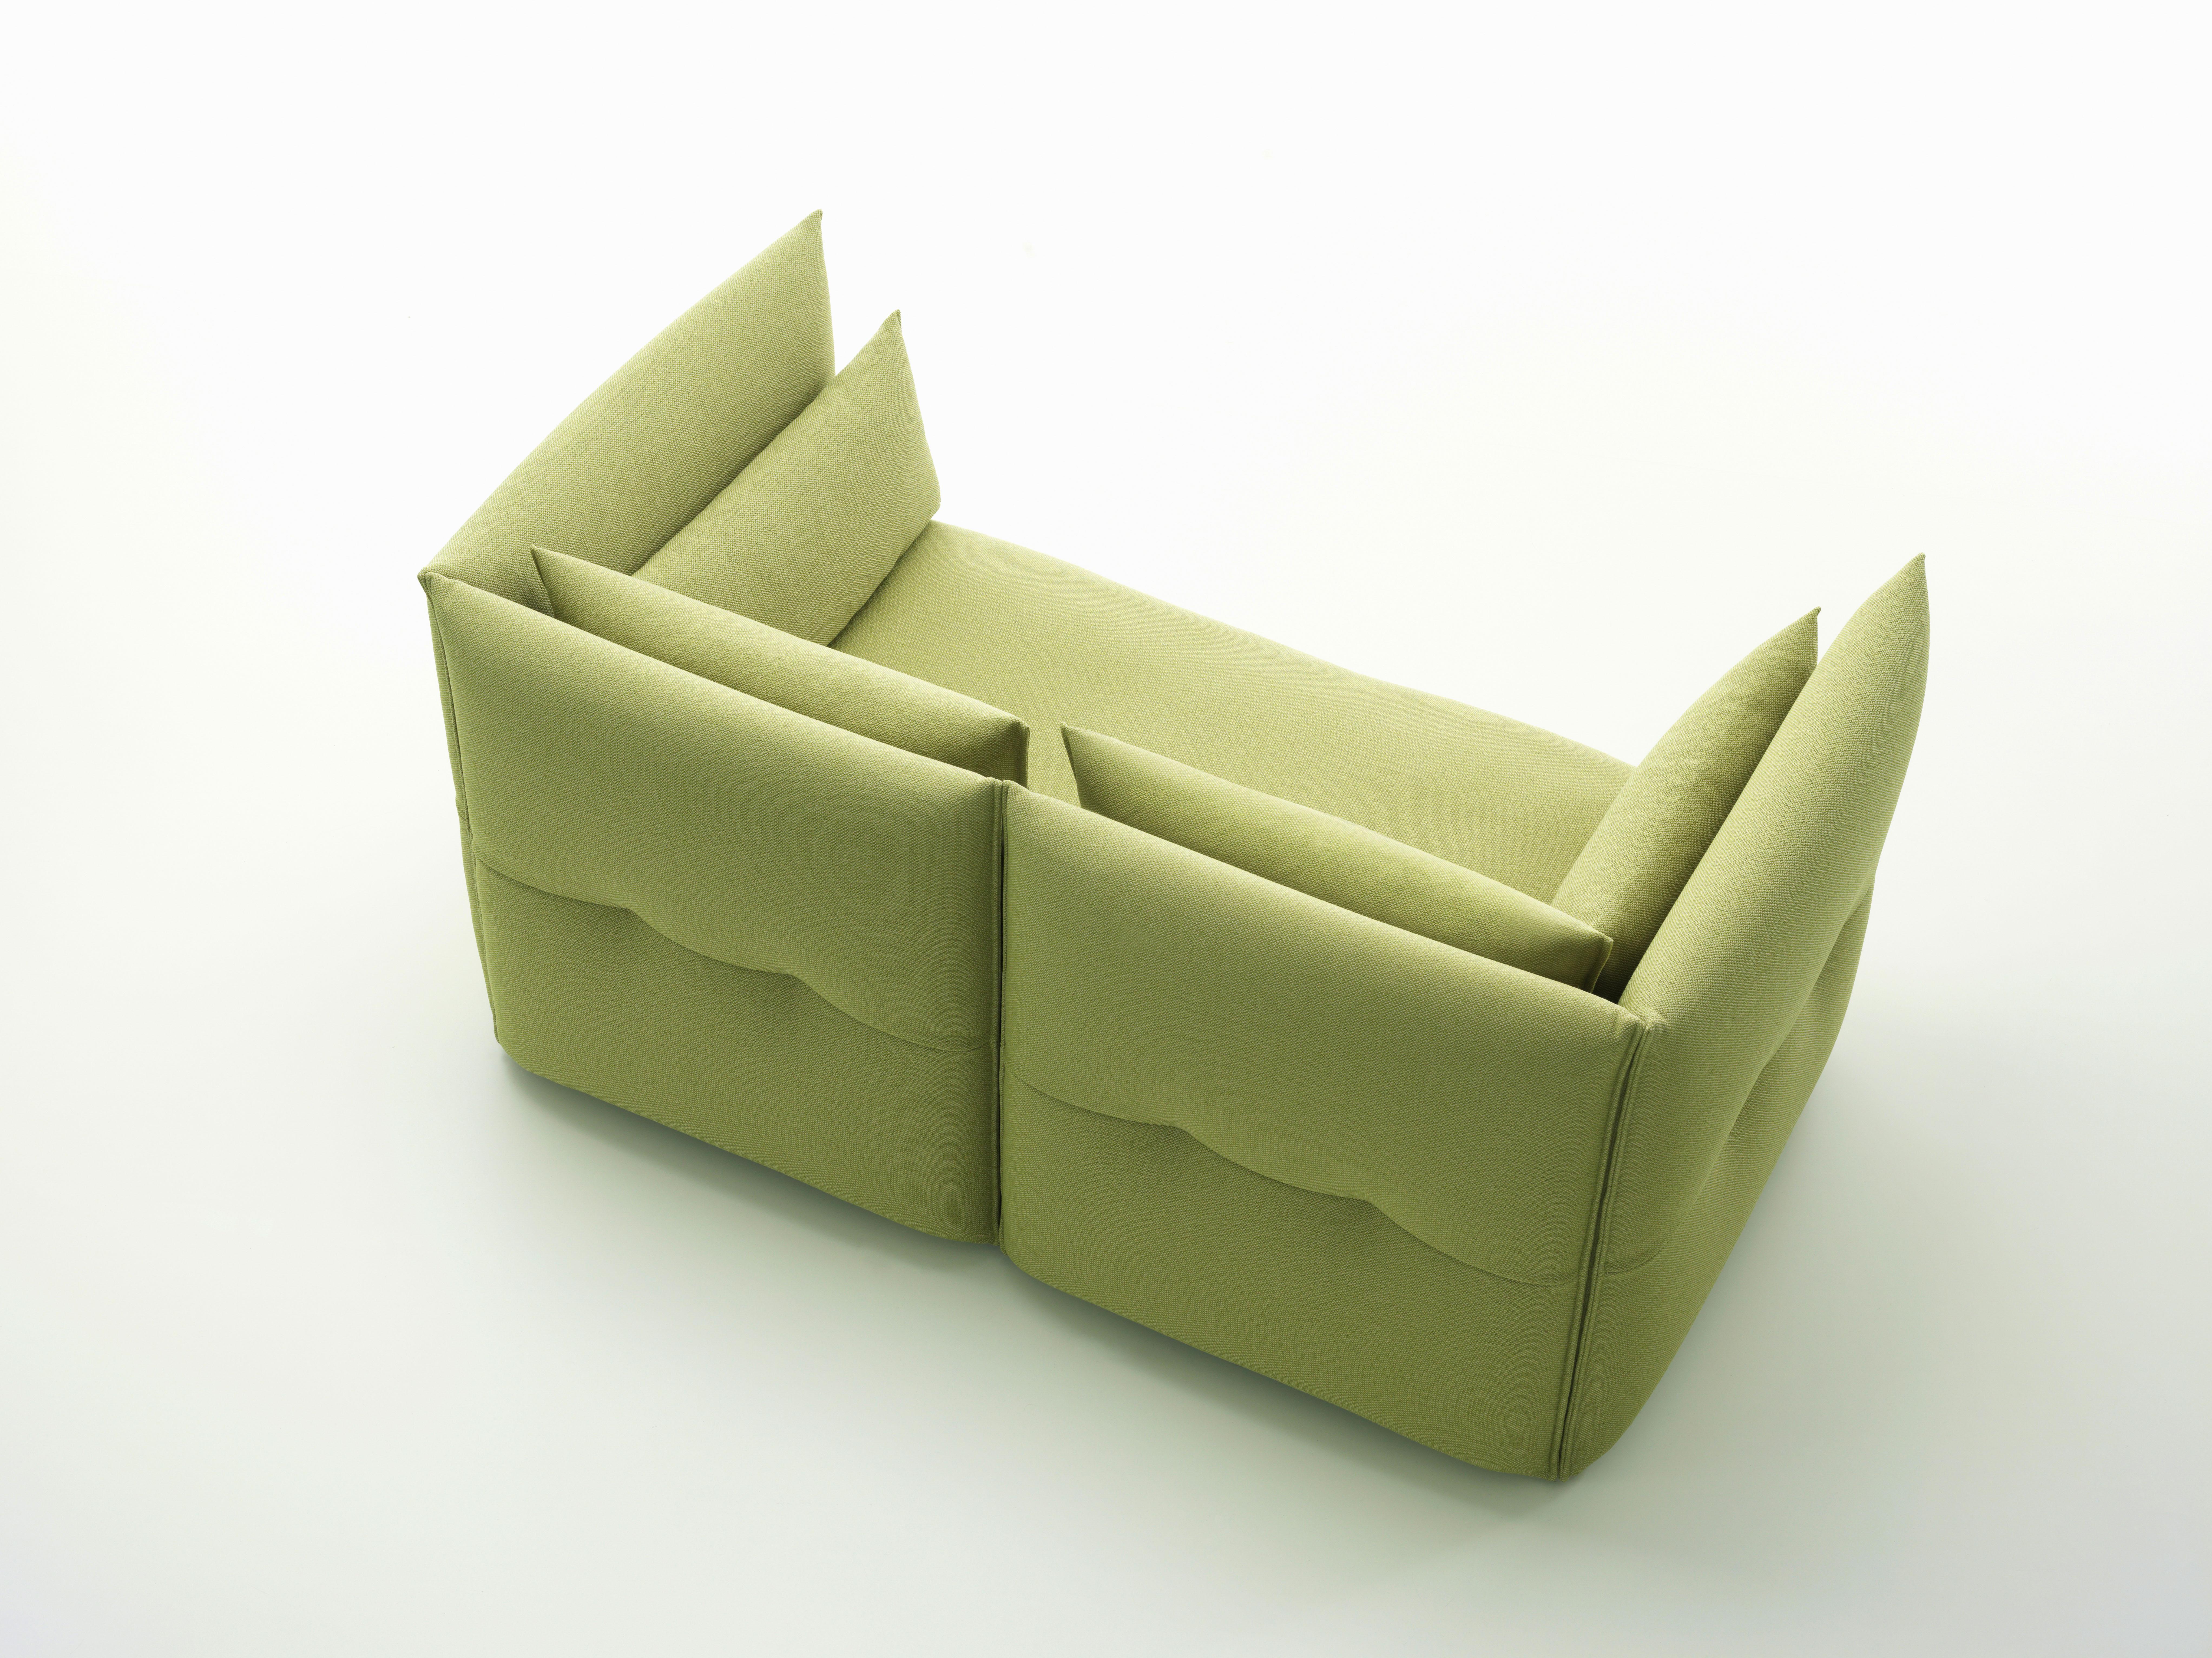 Vitra Mariposa 2-Seat Sofa in Sand & Avocado Credo by Edward Barber & Jay In New Condition For Sale In New York, NY